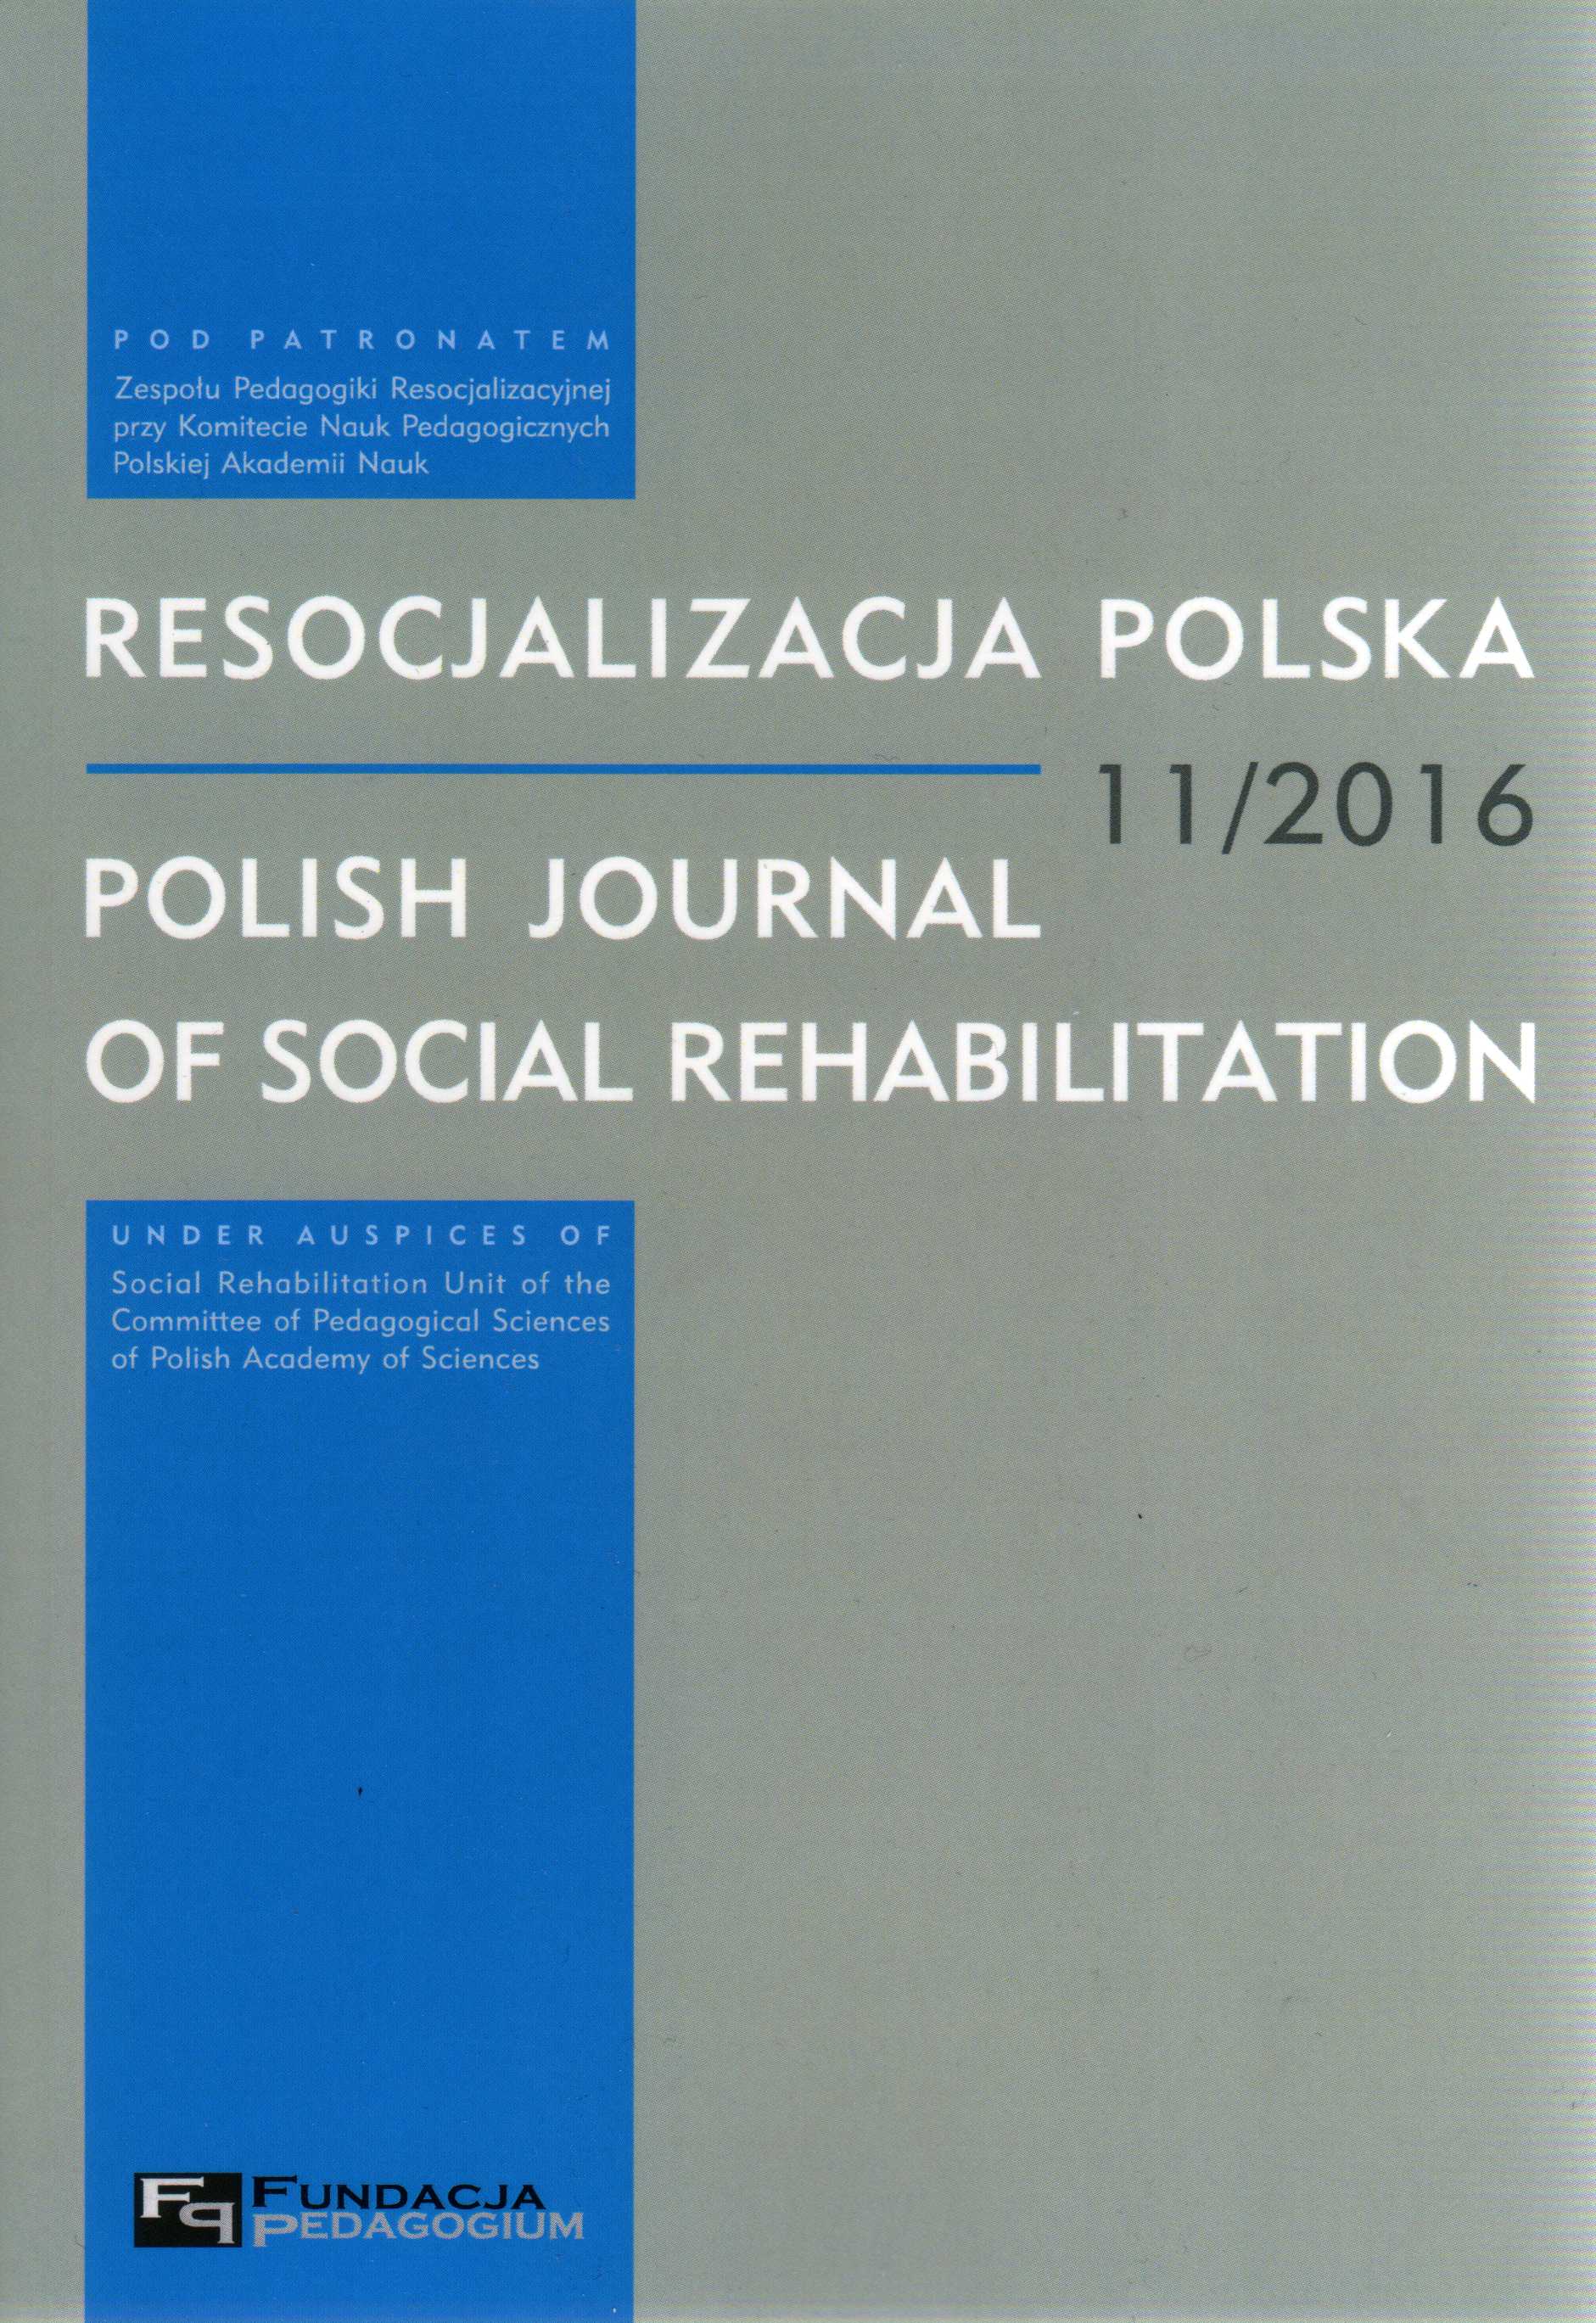 Report on the meeting of the Correctional Pedagogy Group with the Committee of Pedagogical Sciences of the Polish Academy of Sciences, 29.01.2016